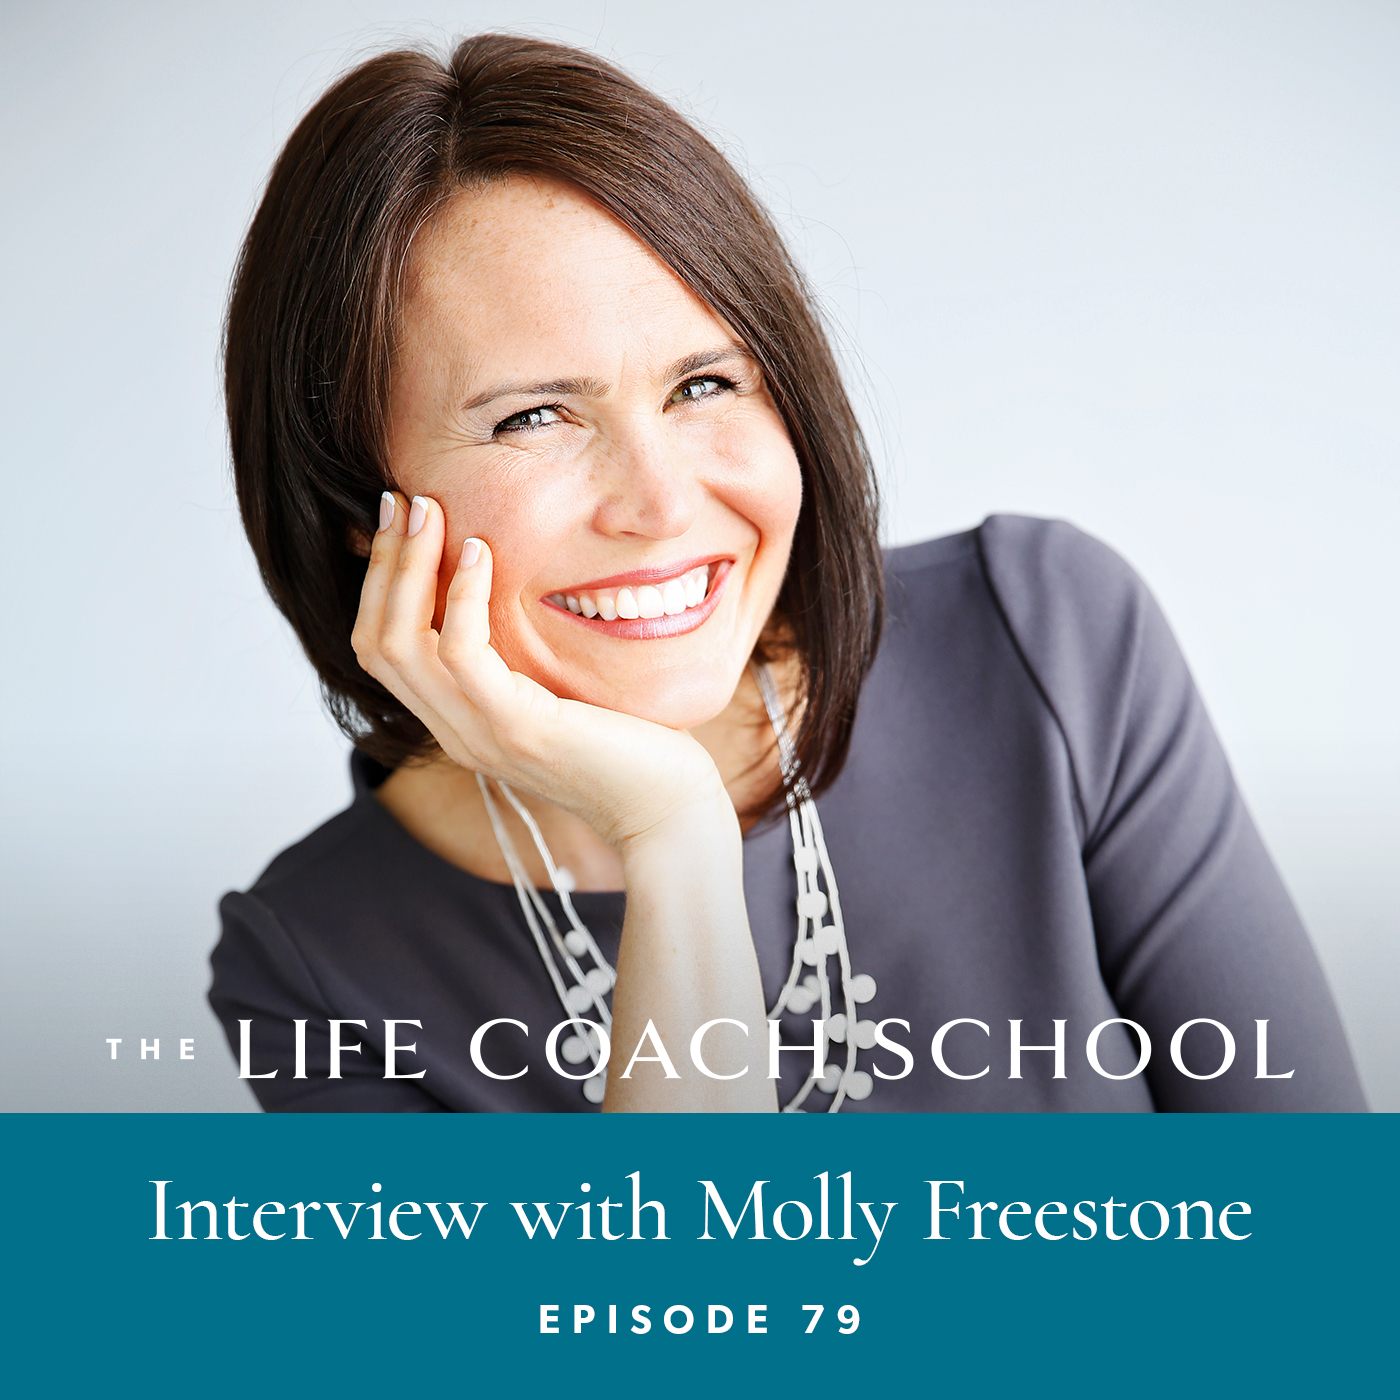 The Life Coach School Podcast with Brooke Castillo | Episode 79 | Interview with Molly Freestone